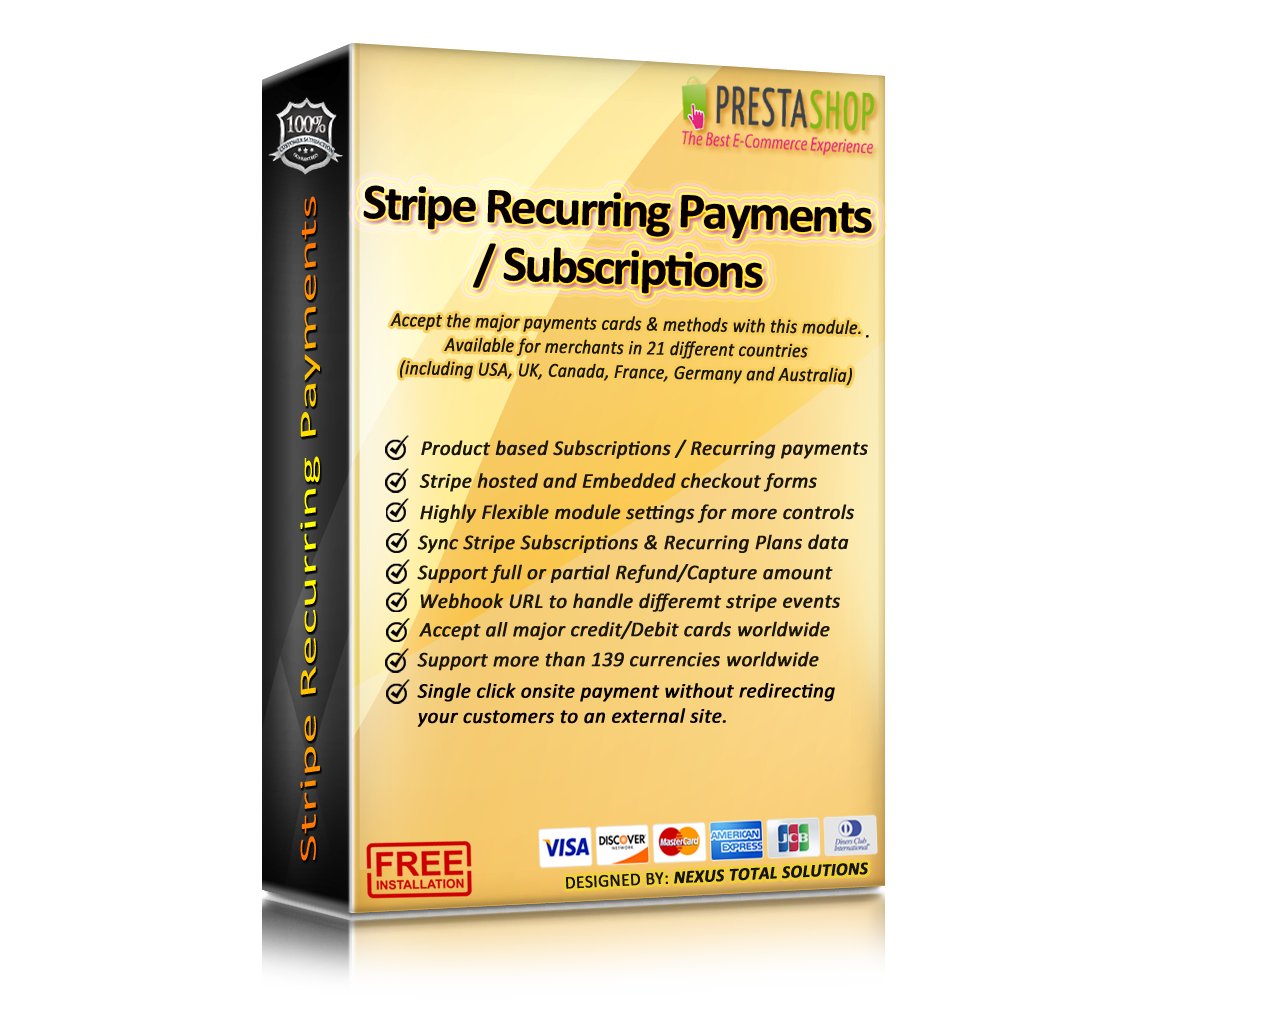 Stripe Recurring Payments / Subscriptions